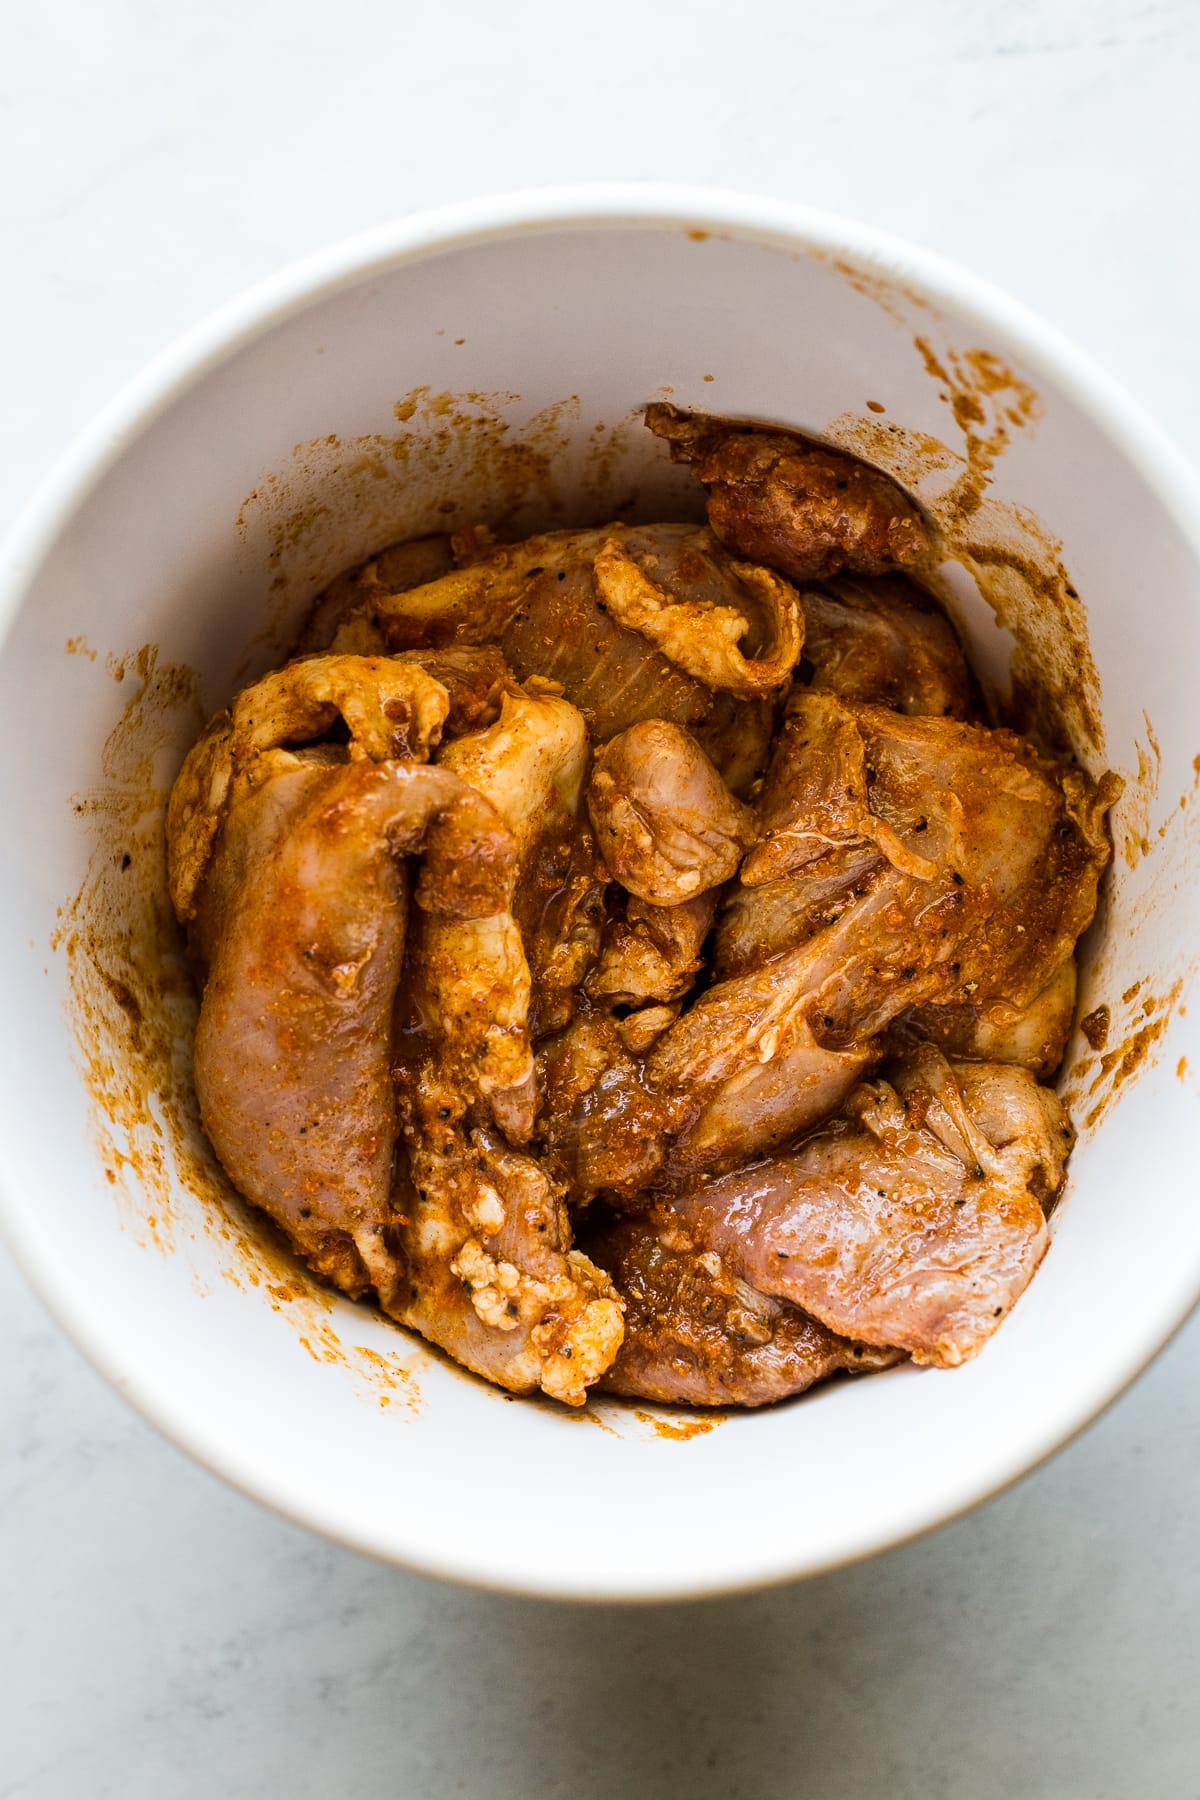 Boneless skinless chicken thighs in a bowl marinating in spices and lime juice.